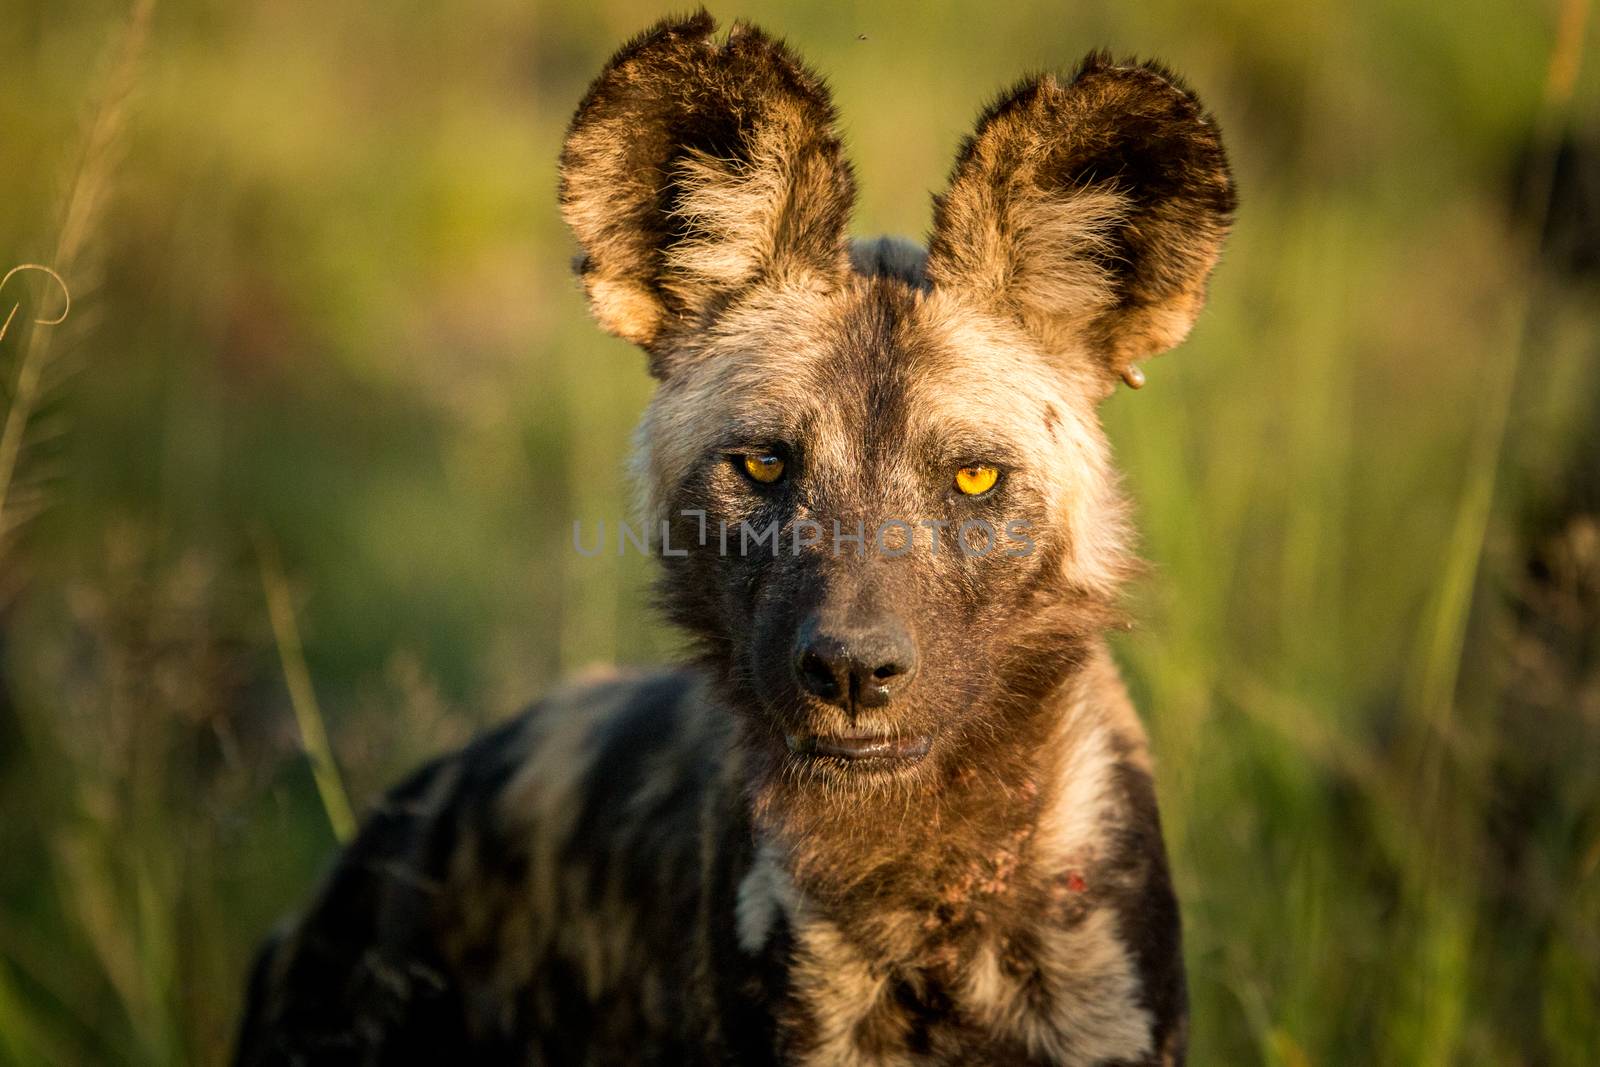 Starring African wild dog in the Kruger National Park, South Africa. by Simoneemanphotography